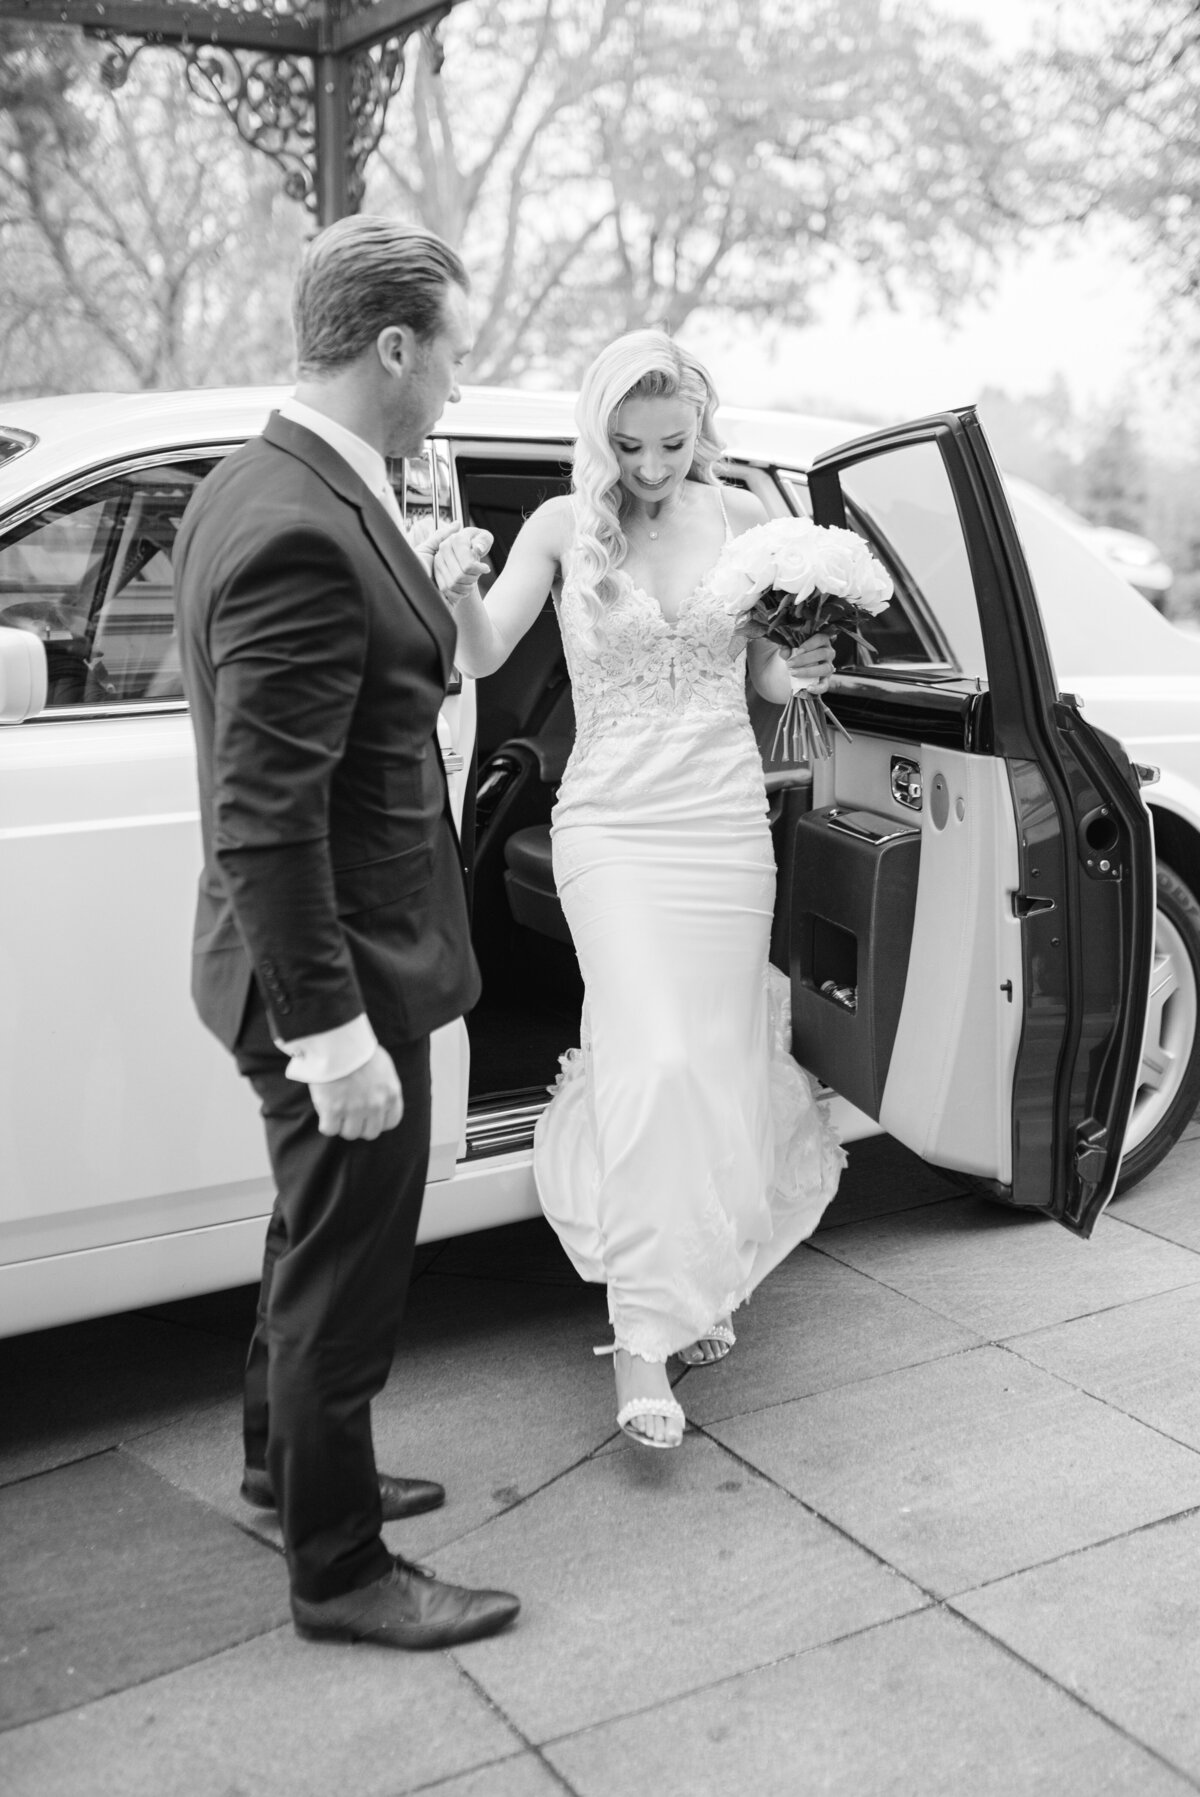 The groom is helping the bride get out the wedding car at the hotel. the image is edited in black and white